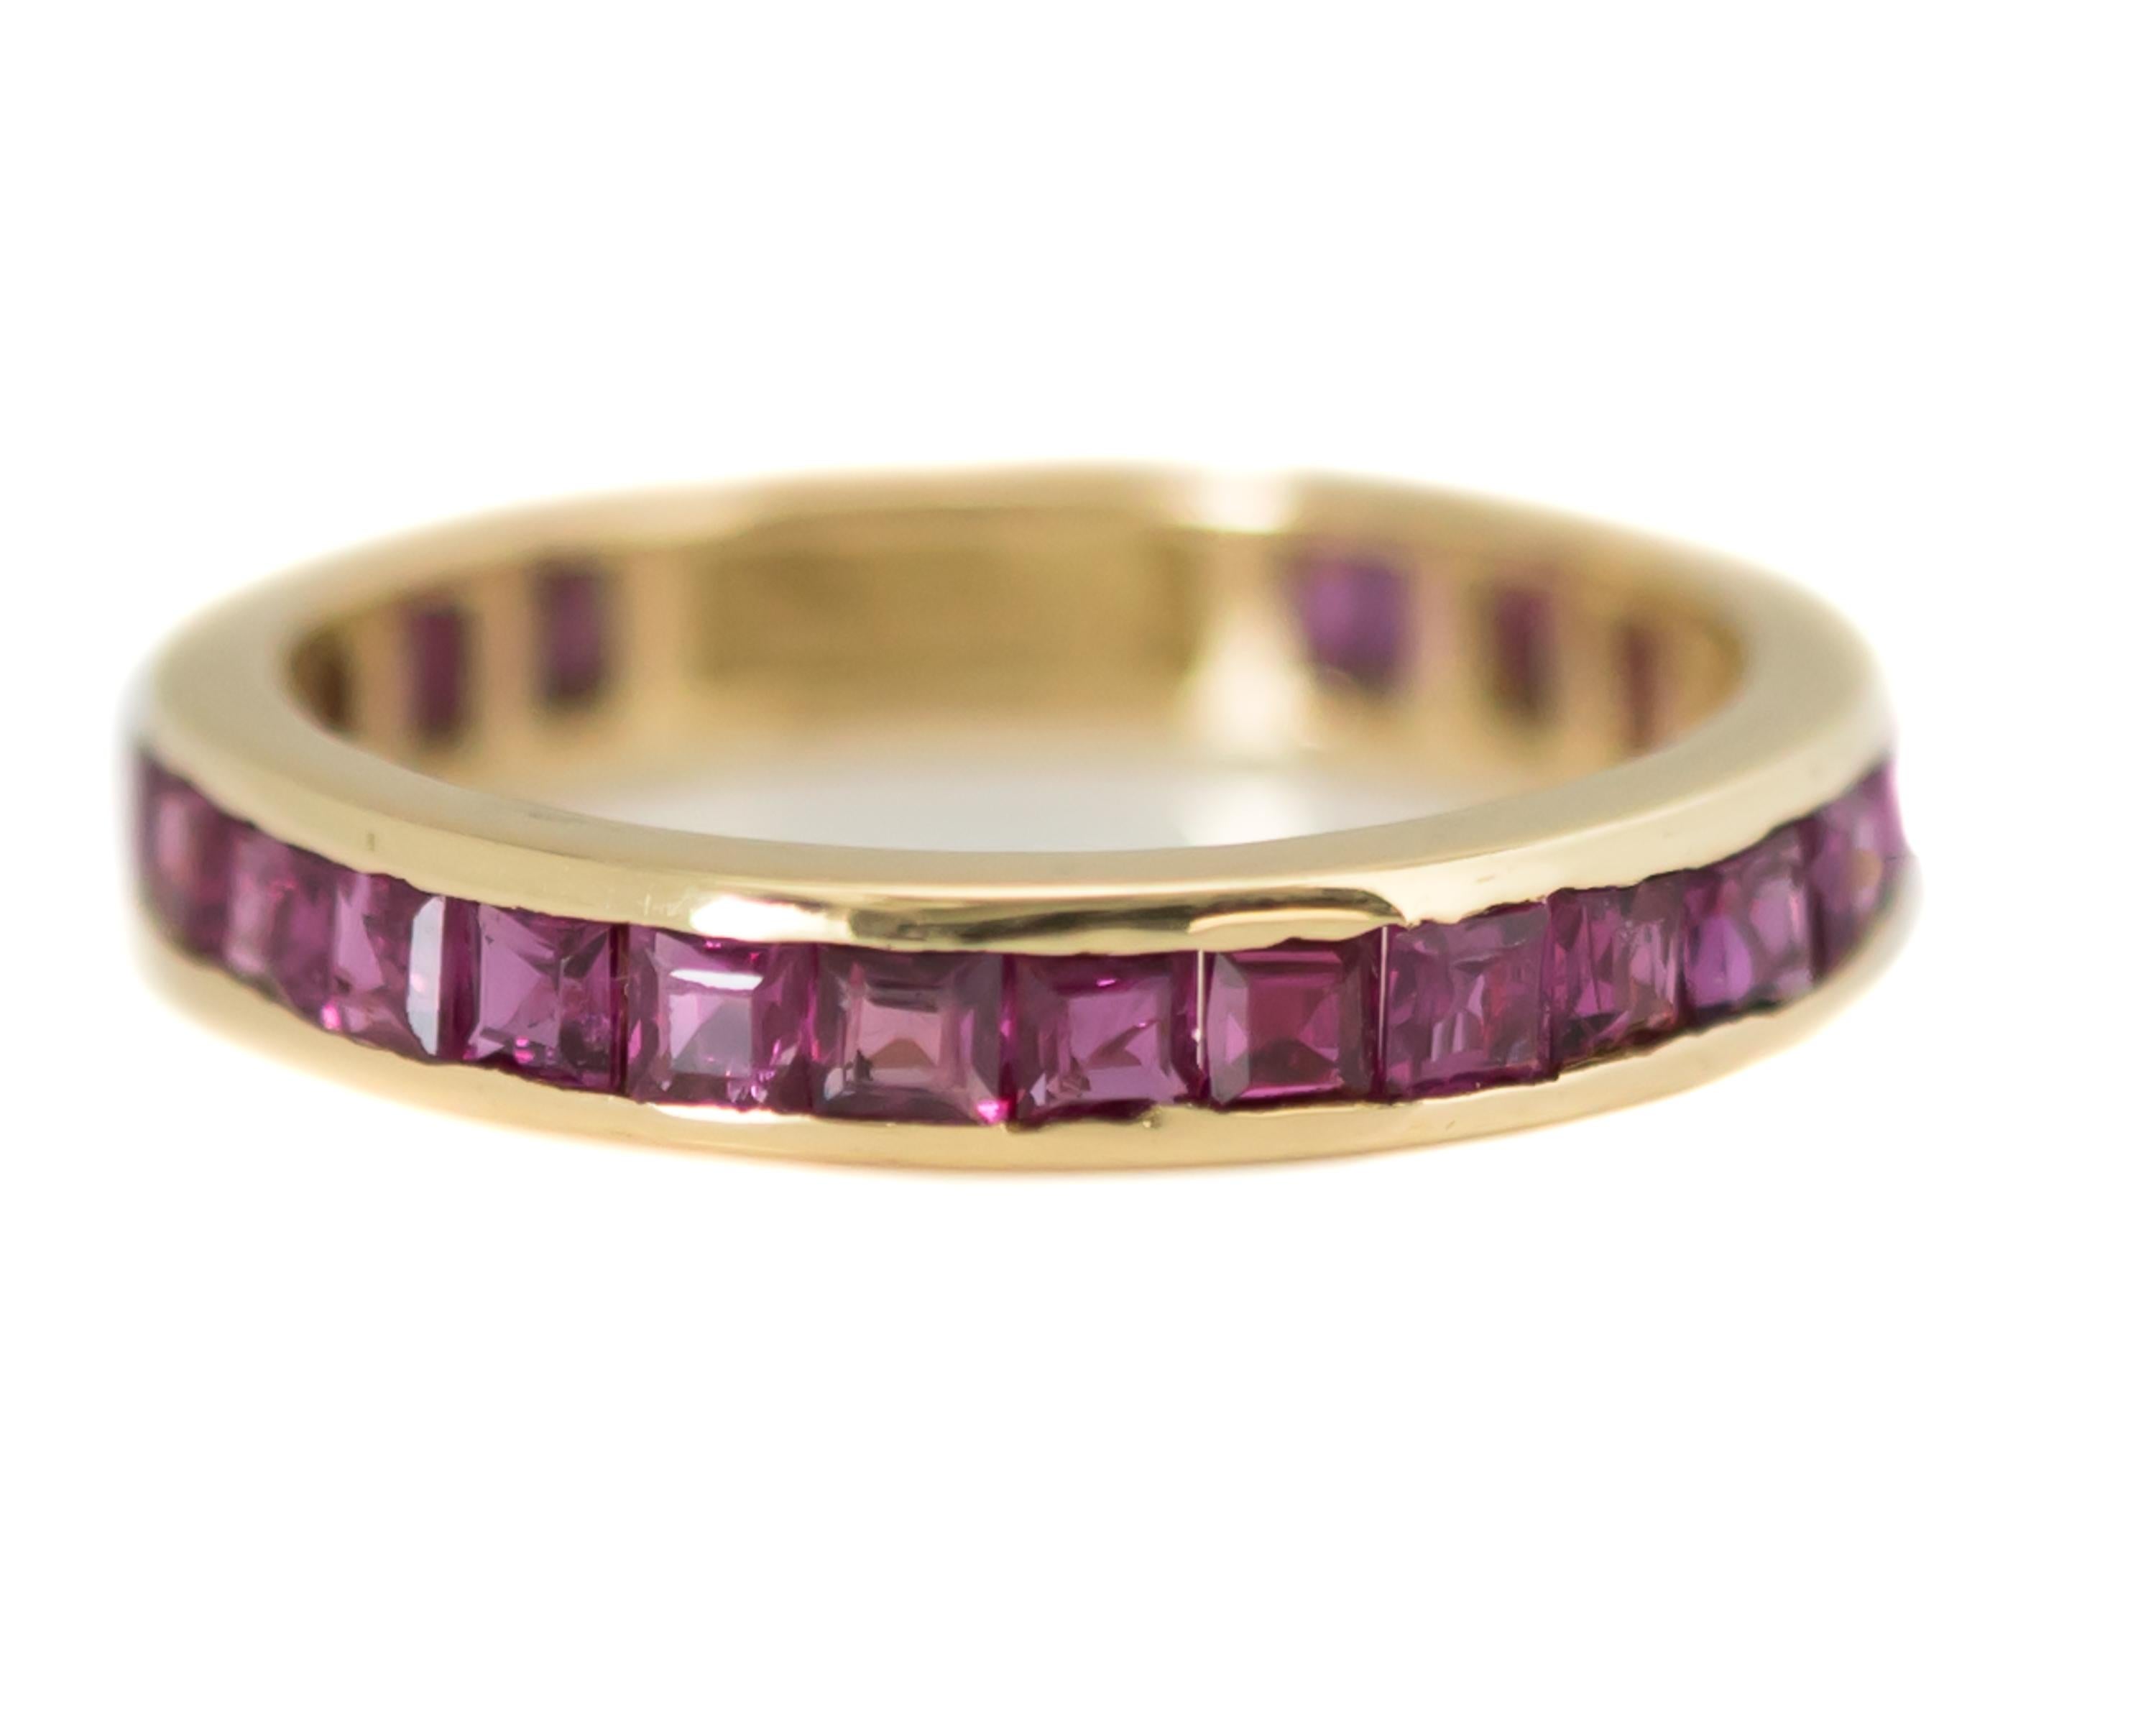 1950s Retro Ruby Eternity Band - 14 Karat Yellow Gold, Rubies

Features: 
3 millimeter wide band
Channel set, square French cut Rubies
Pinkish-red rubies
14 Karat Yellow Gold High Polish Setting
Ring fits a size 4.75

Ring Details;
Size: 4.75
Width: